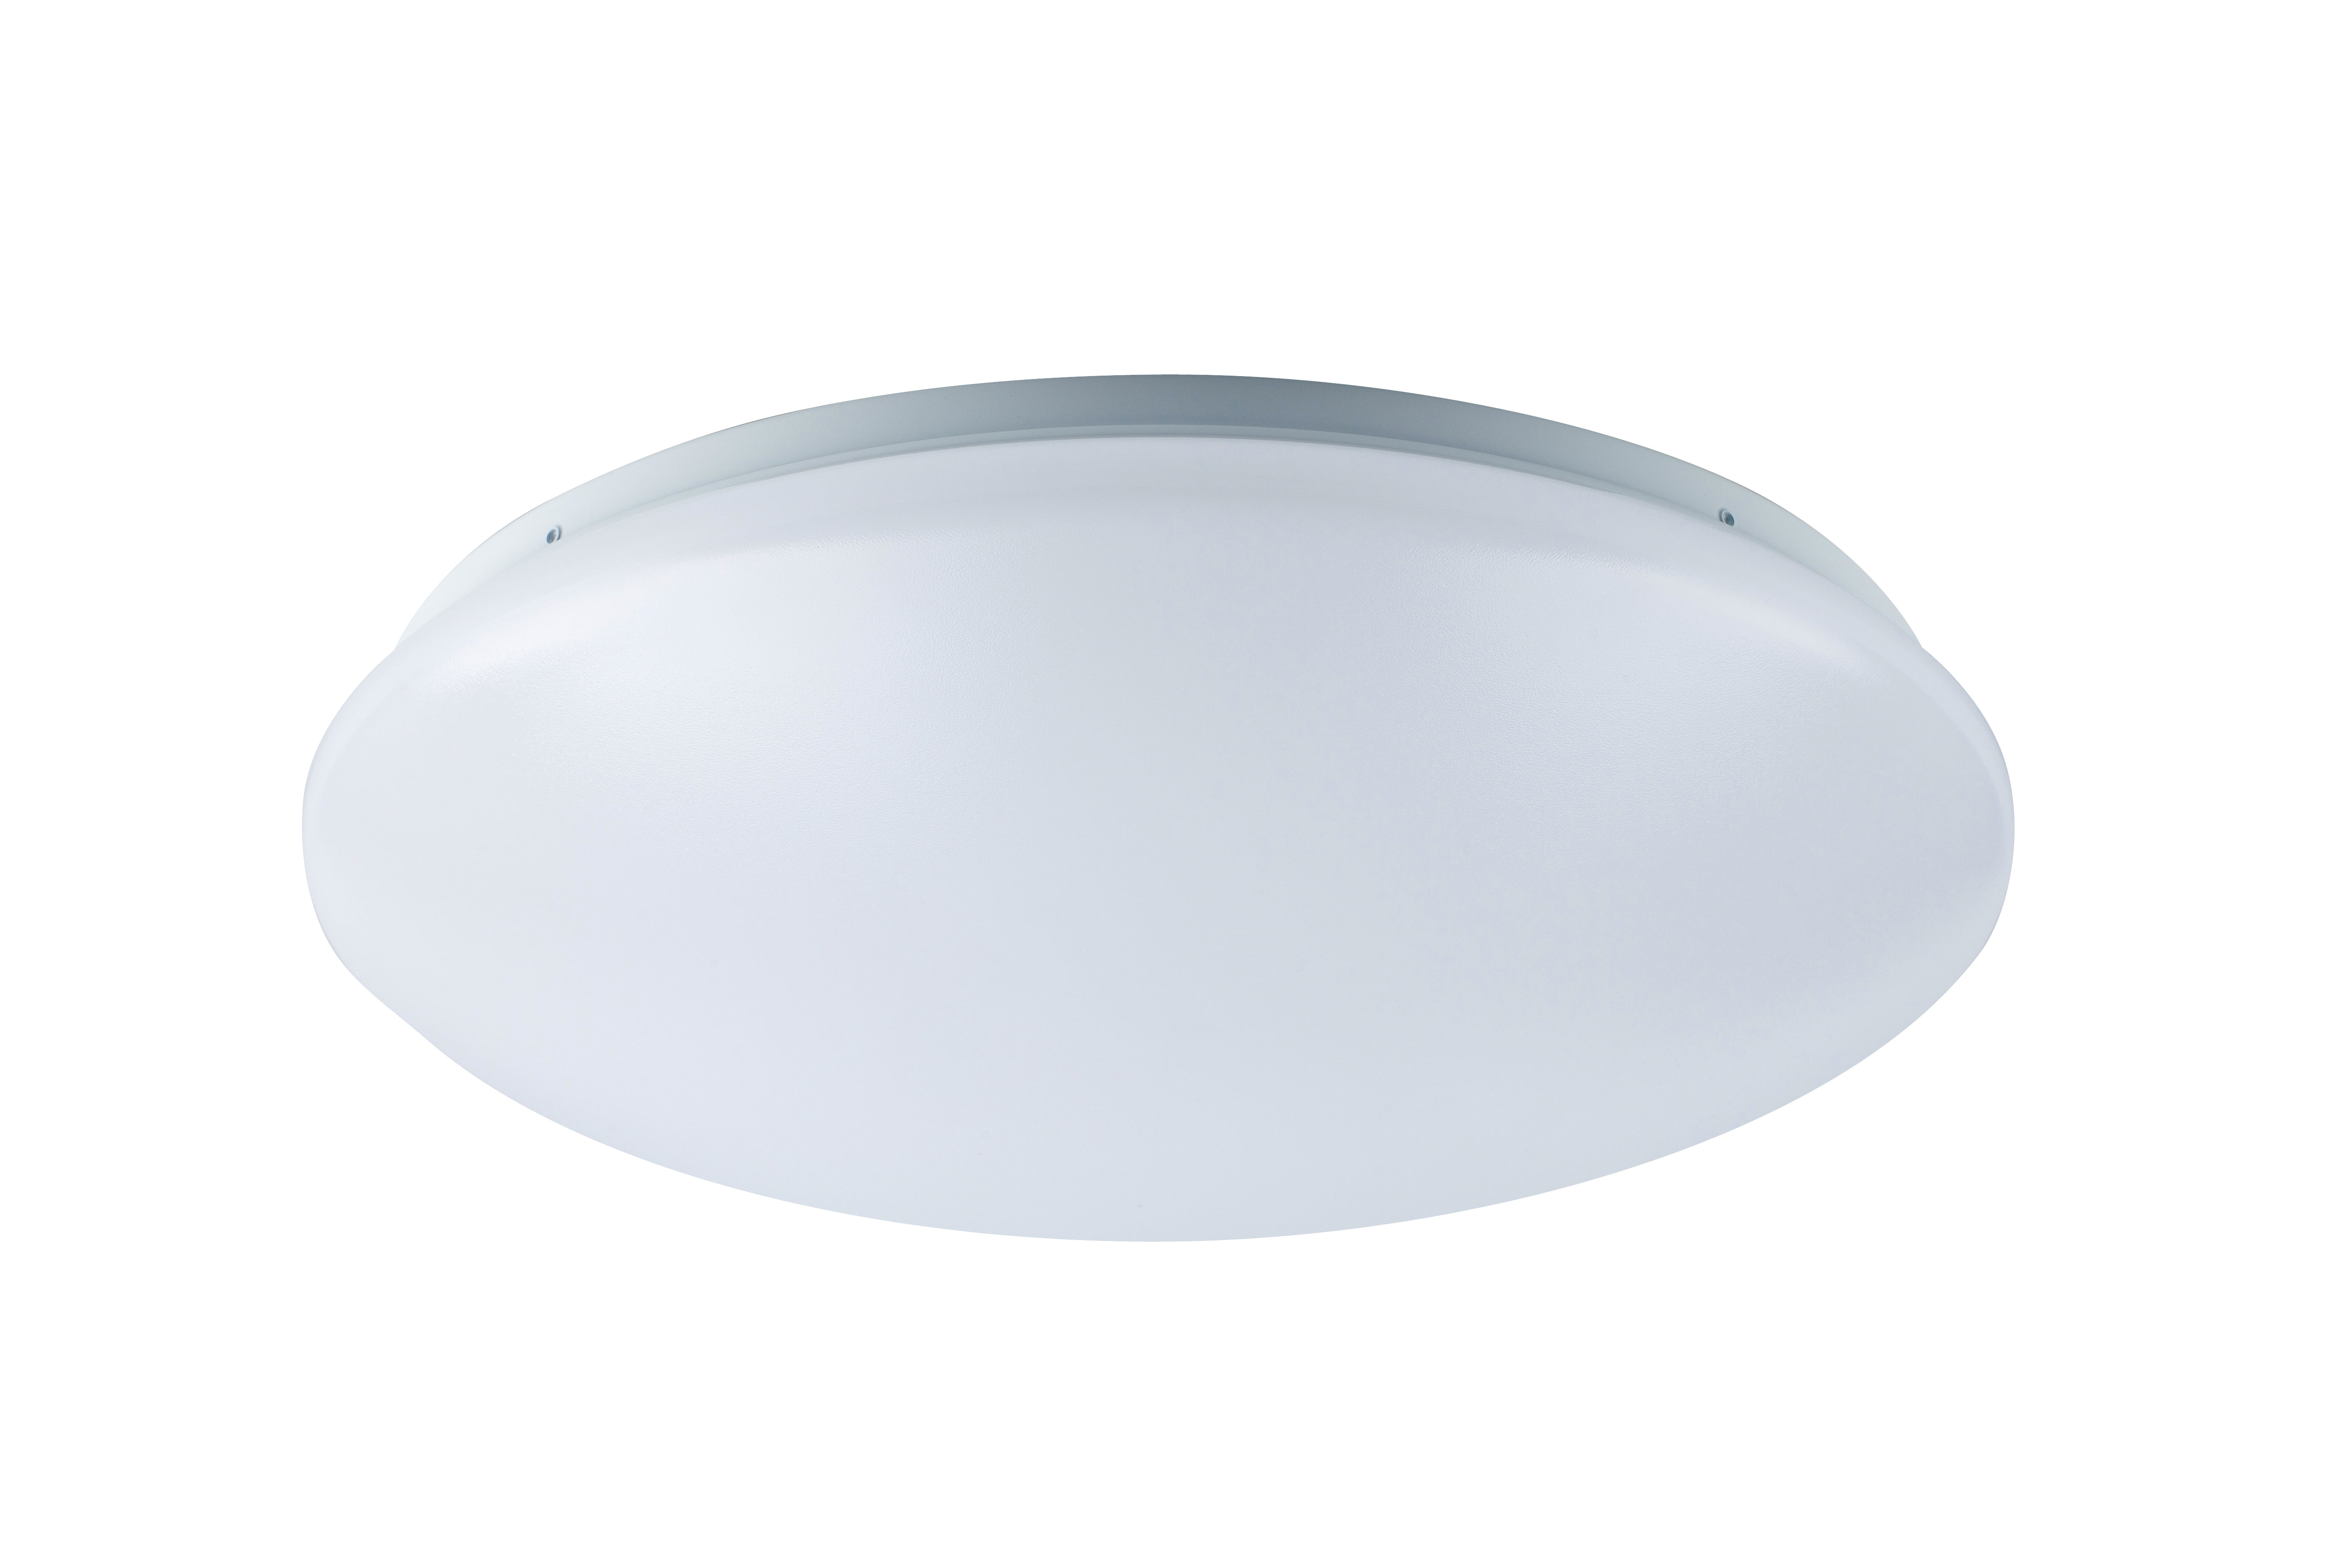 LED CLOUD CEILING FLUSH, 3000K, 120, CRI80, UL, 15W, 75W EQUIVALENT,  50000HRS, LM1050, DIMMABLE, INPUT VOLTAGE 120V